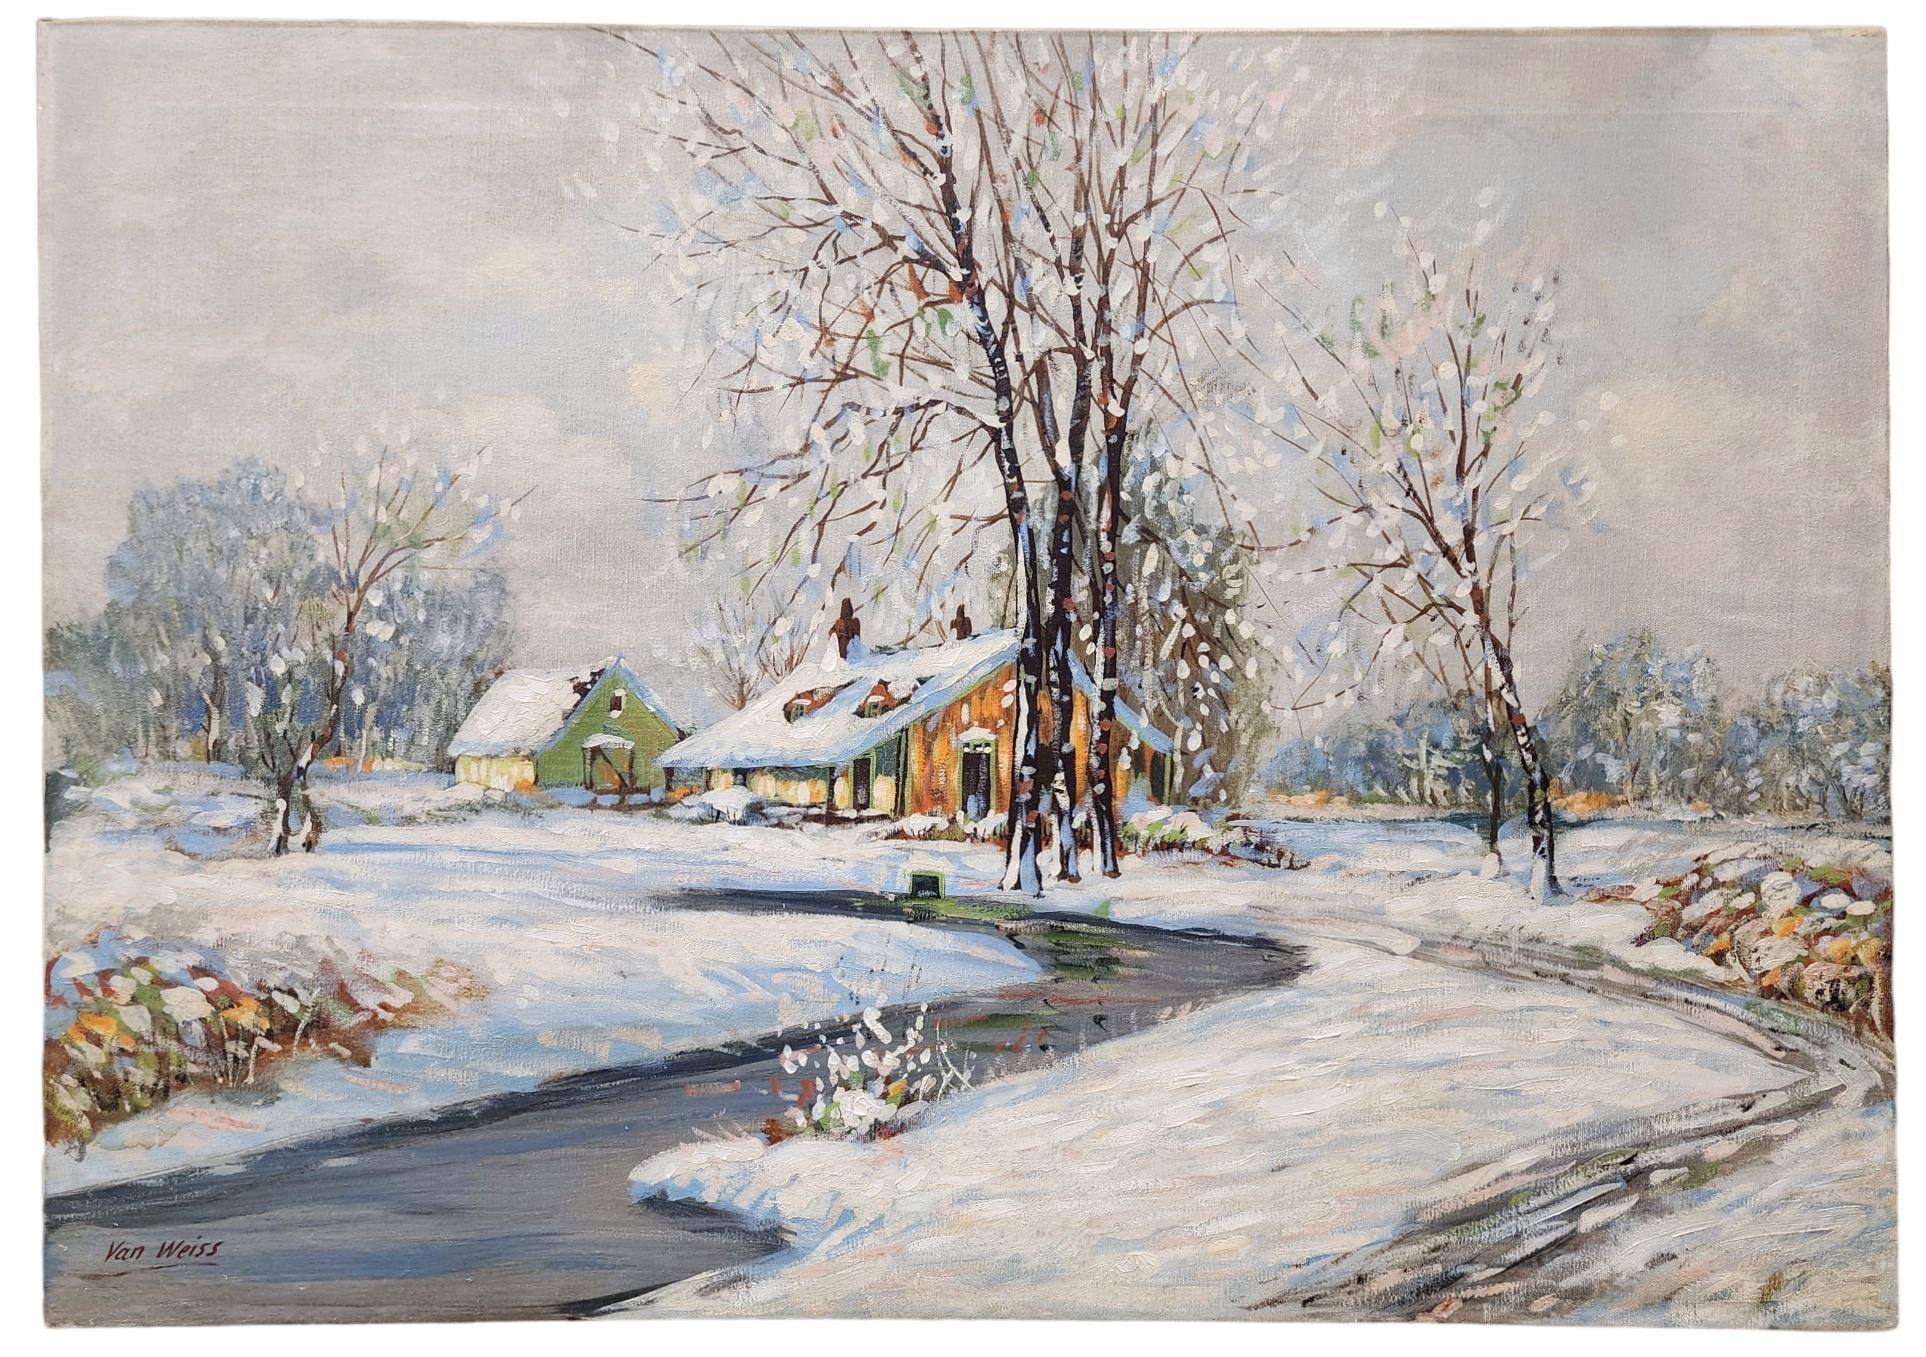 Winter Landscape, c. 1930s House, River, Snow - Painting by Van Weiss